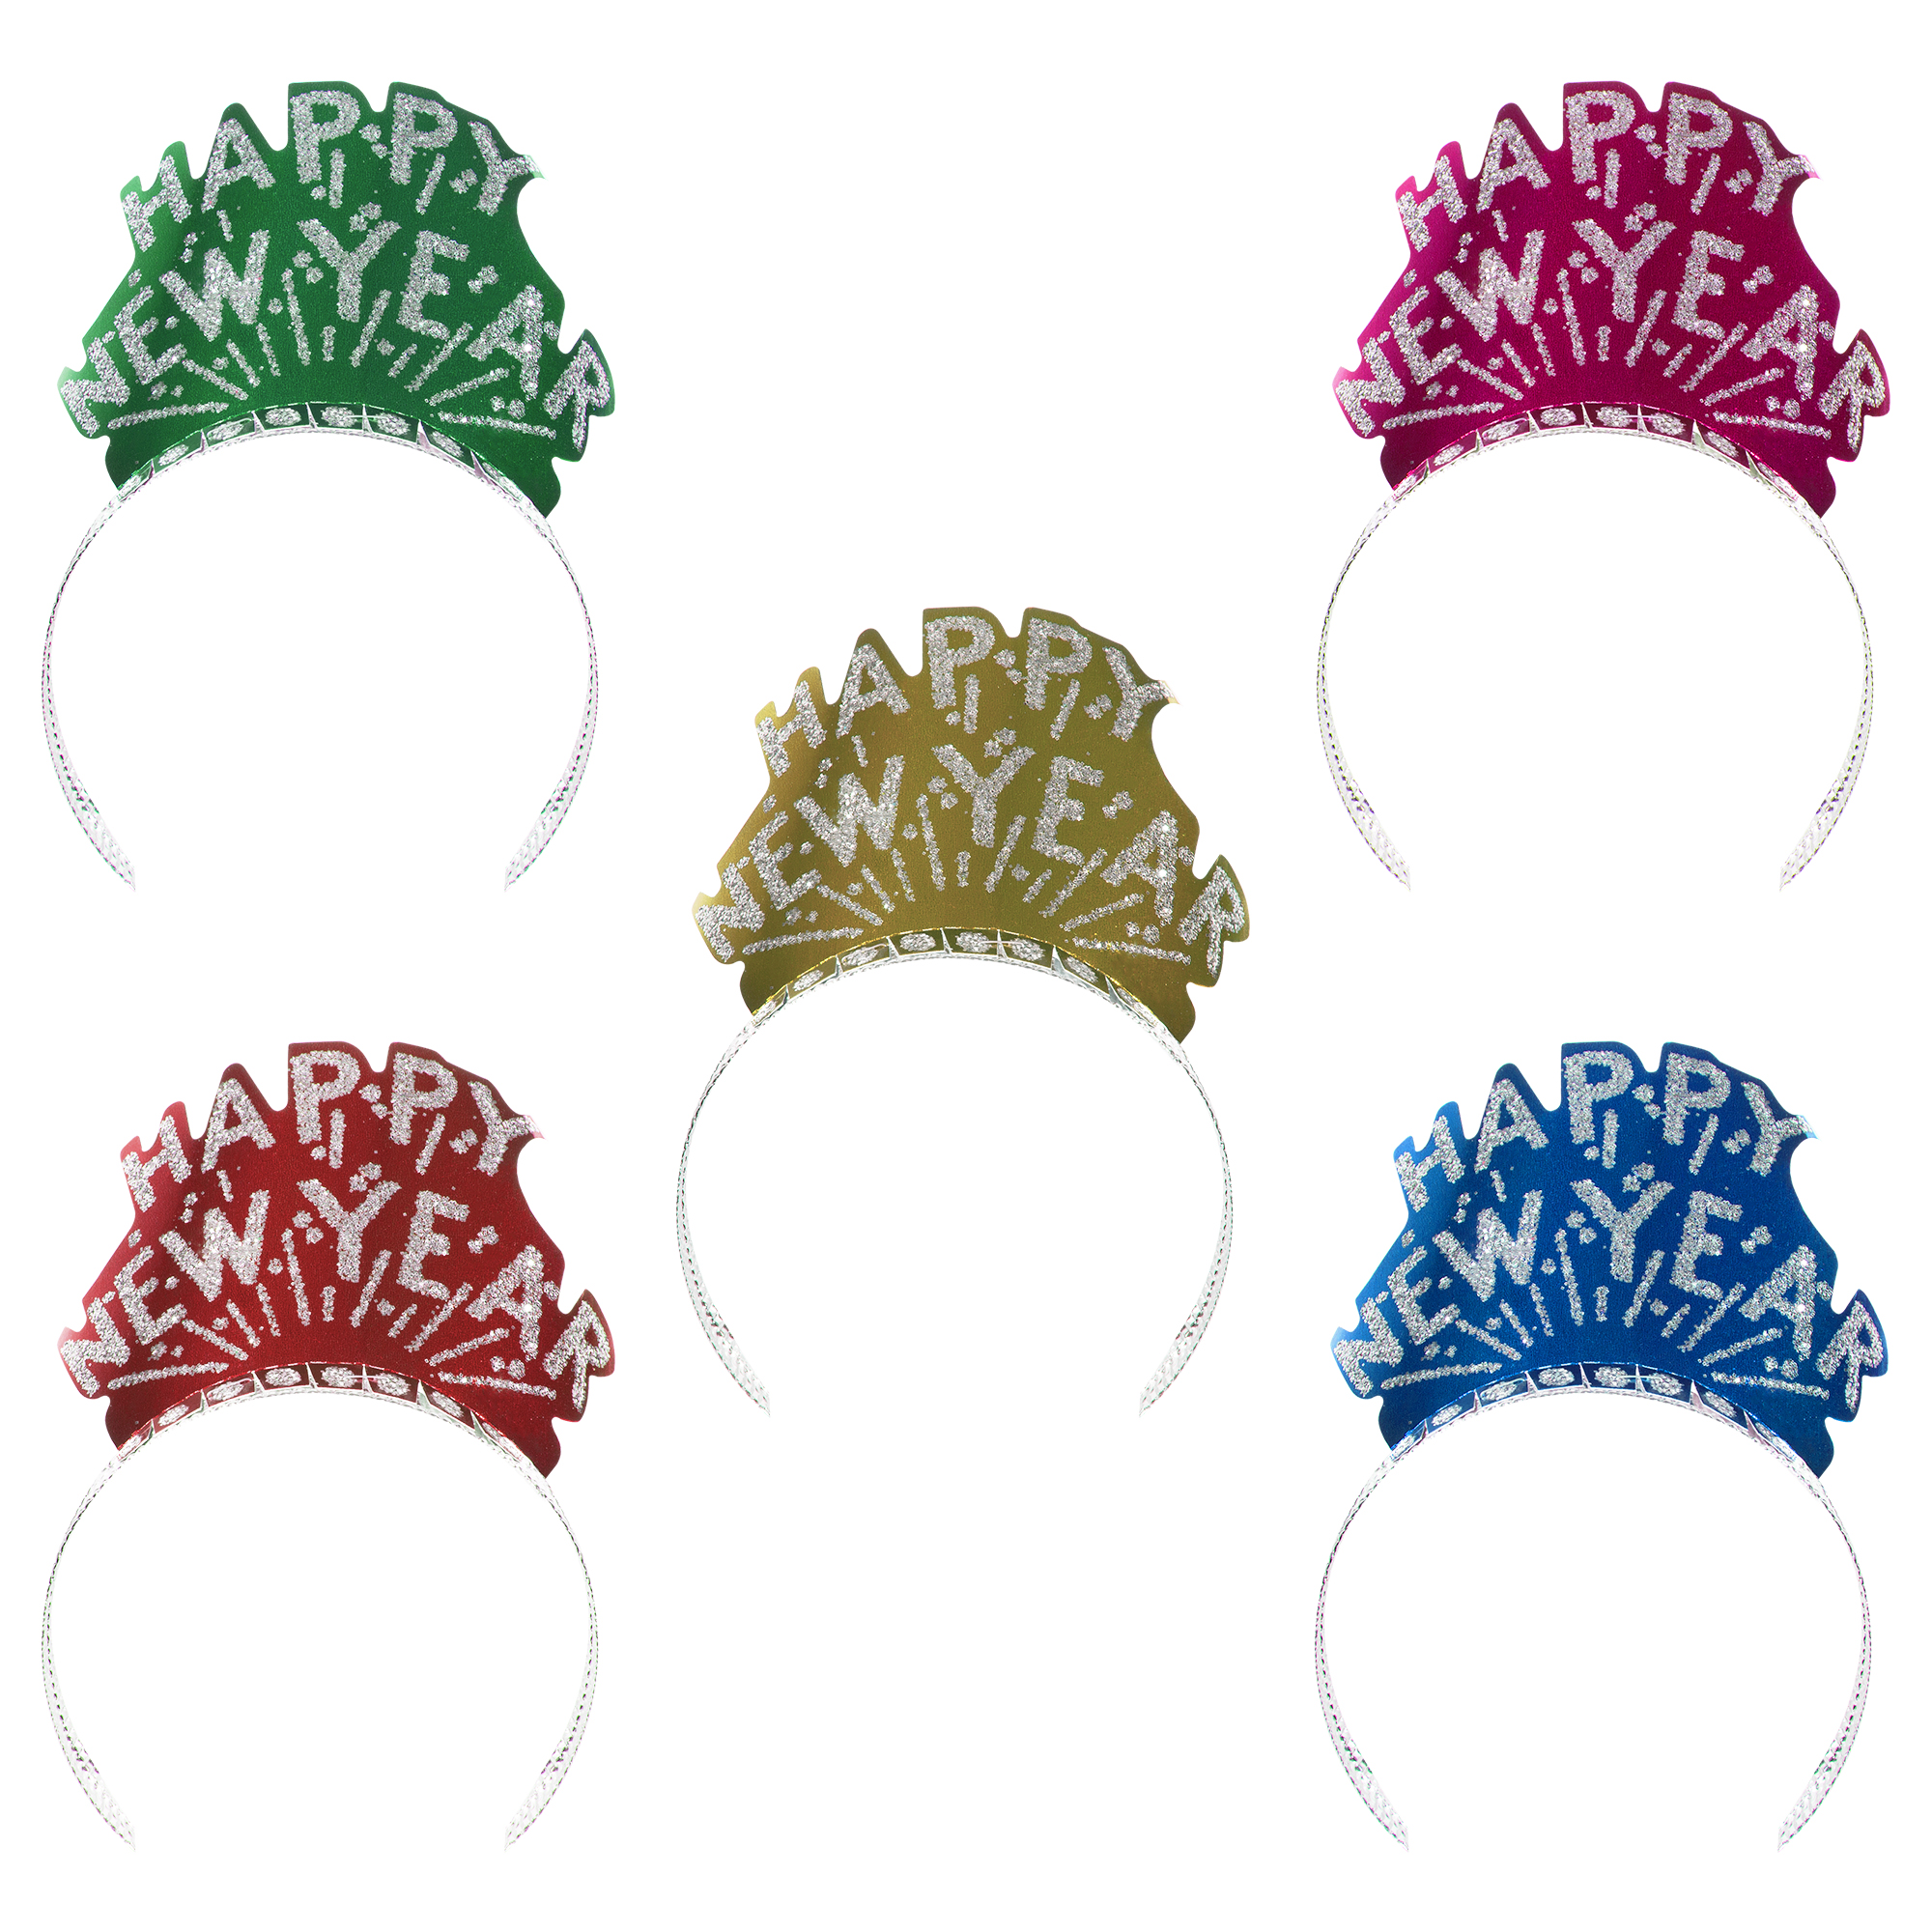 Happy New Year Tiara Assortment - 12 Pack by Windy City Novelties